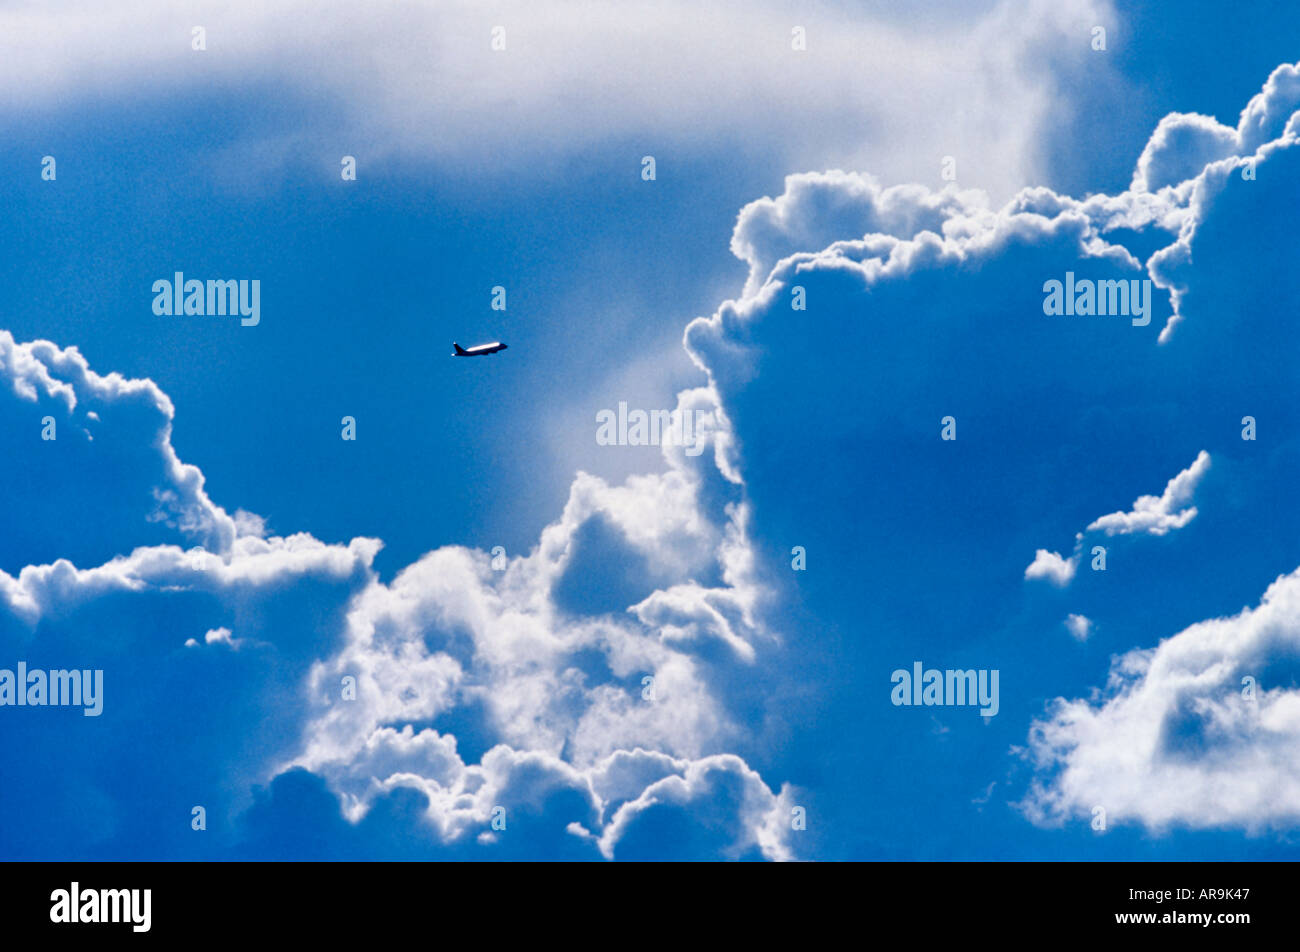 Airbus A320 jet airliner flying at high altitude between clouds Stock Photo